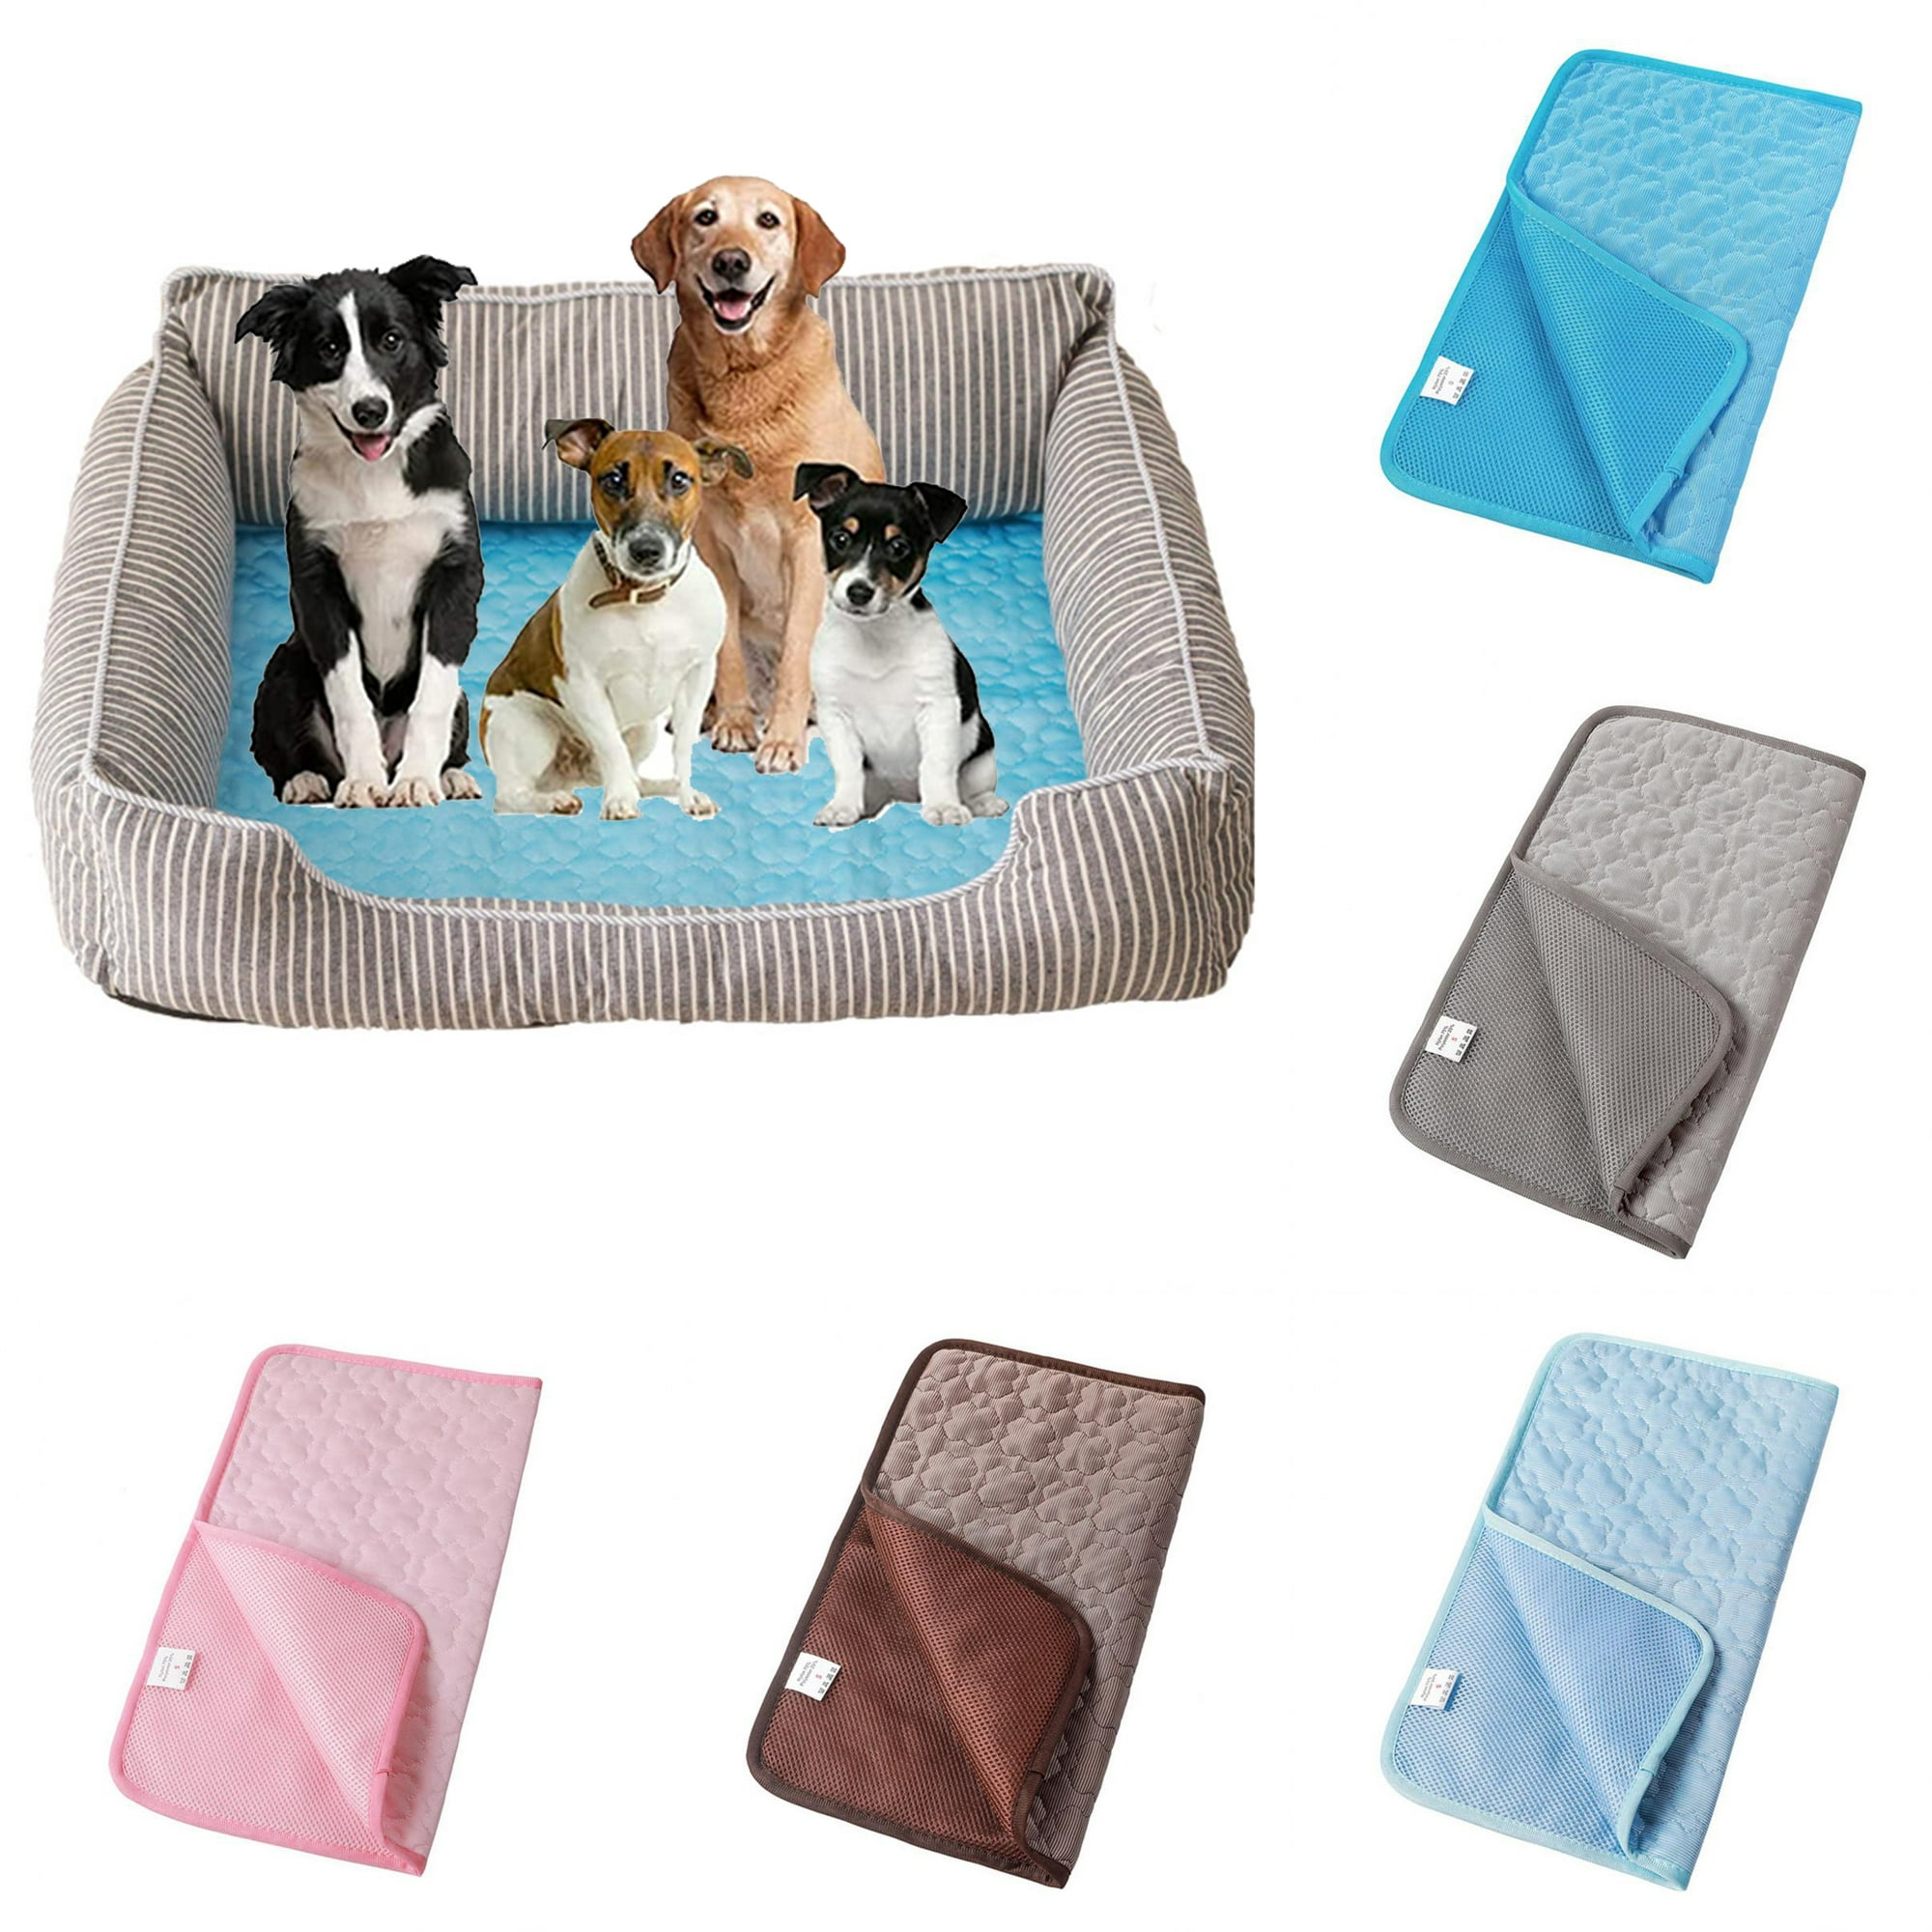 IV. Factors to Consider When Choosing a Dog Cooling Mat